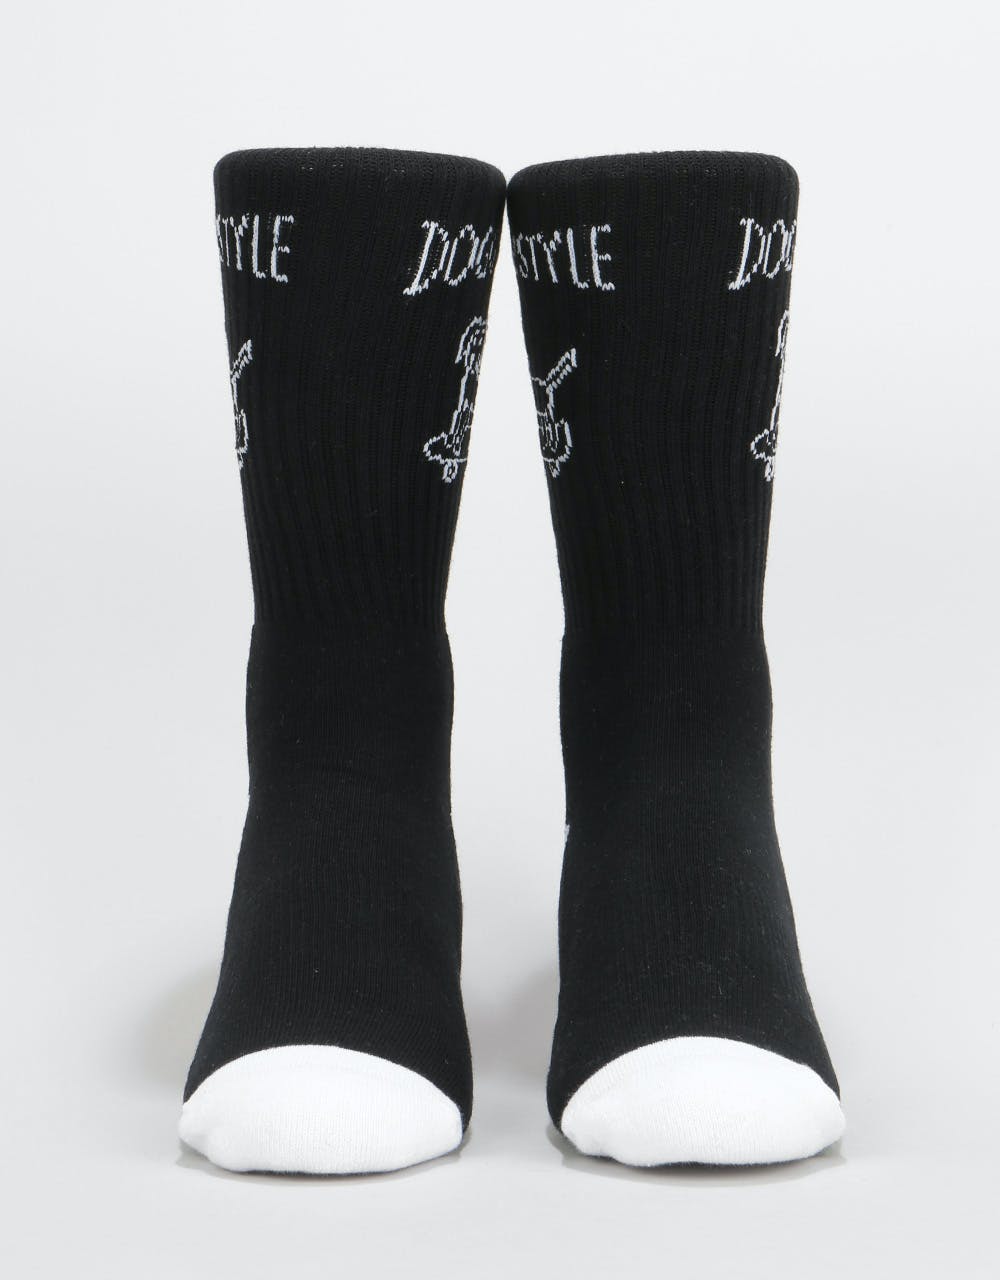 Route One Doggy Style Crew Socks - Black/White